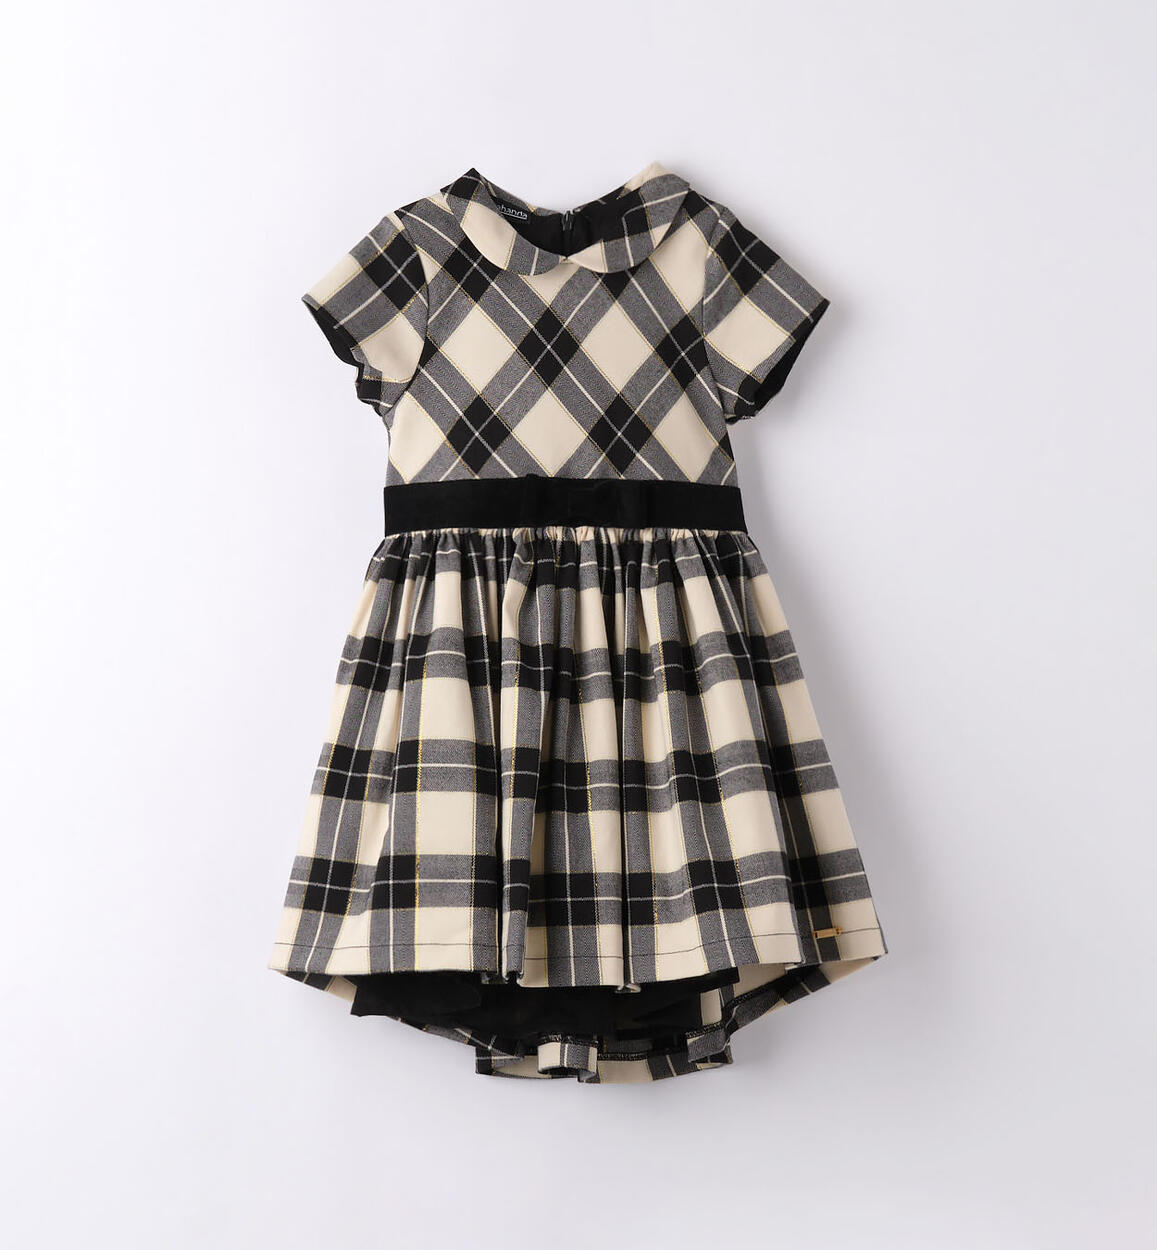 Elegant checked dress with a bow for girls